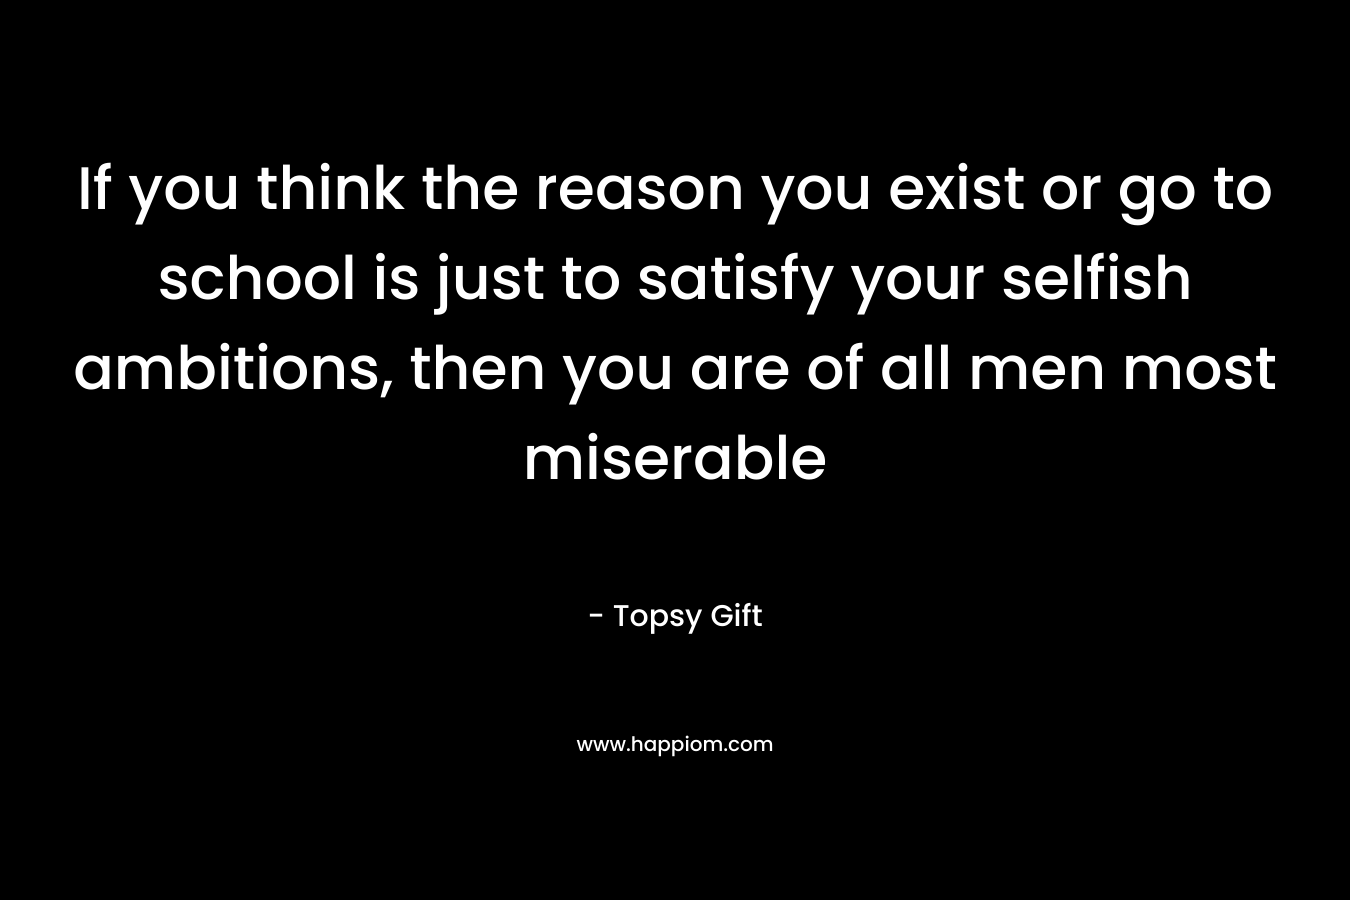 If you think the reason you exist or go to school is just to satisfy your selfish ambitions, then you are of all men most miserable